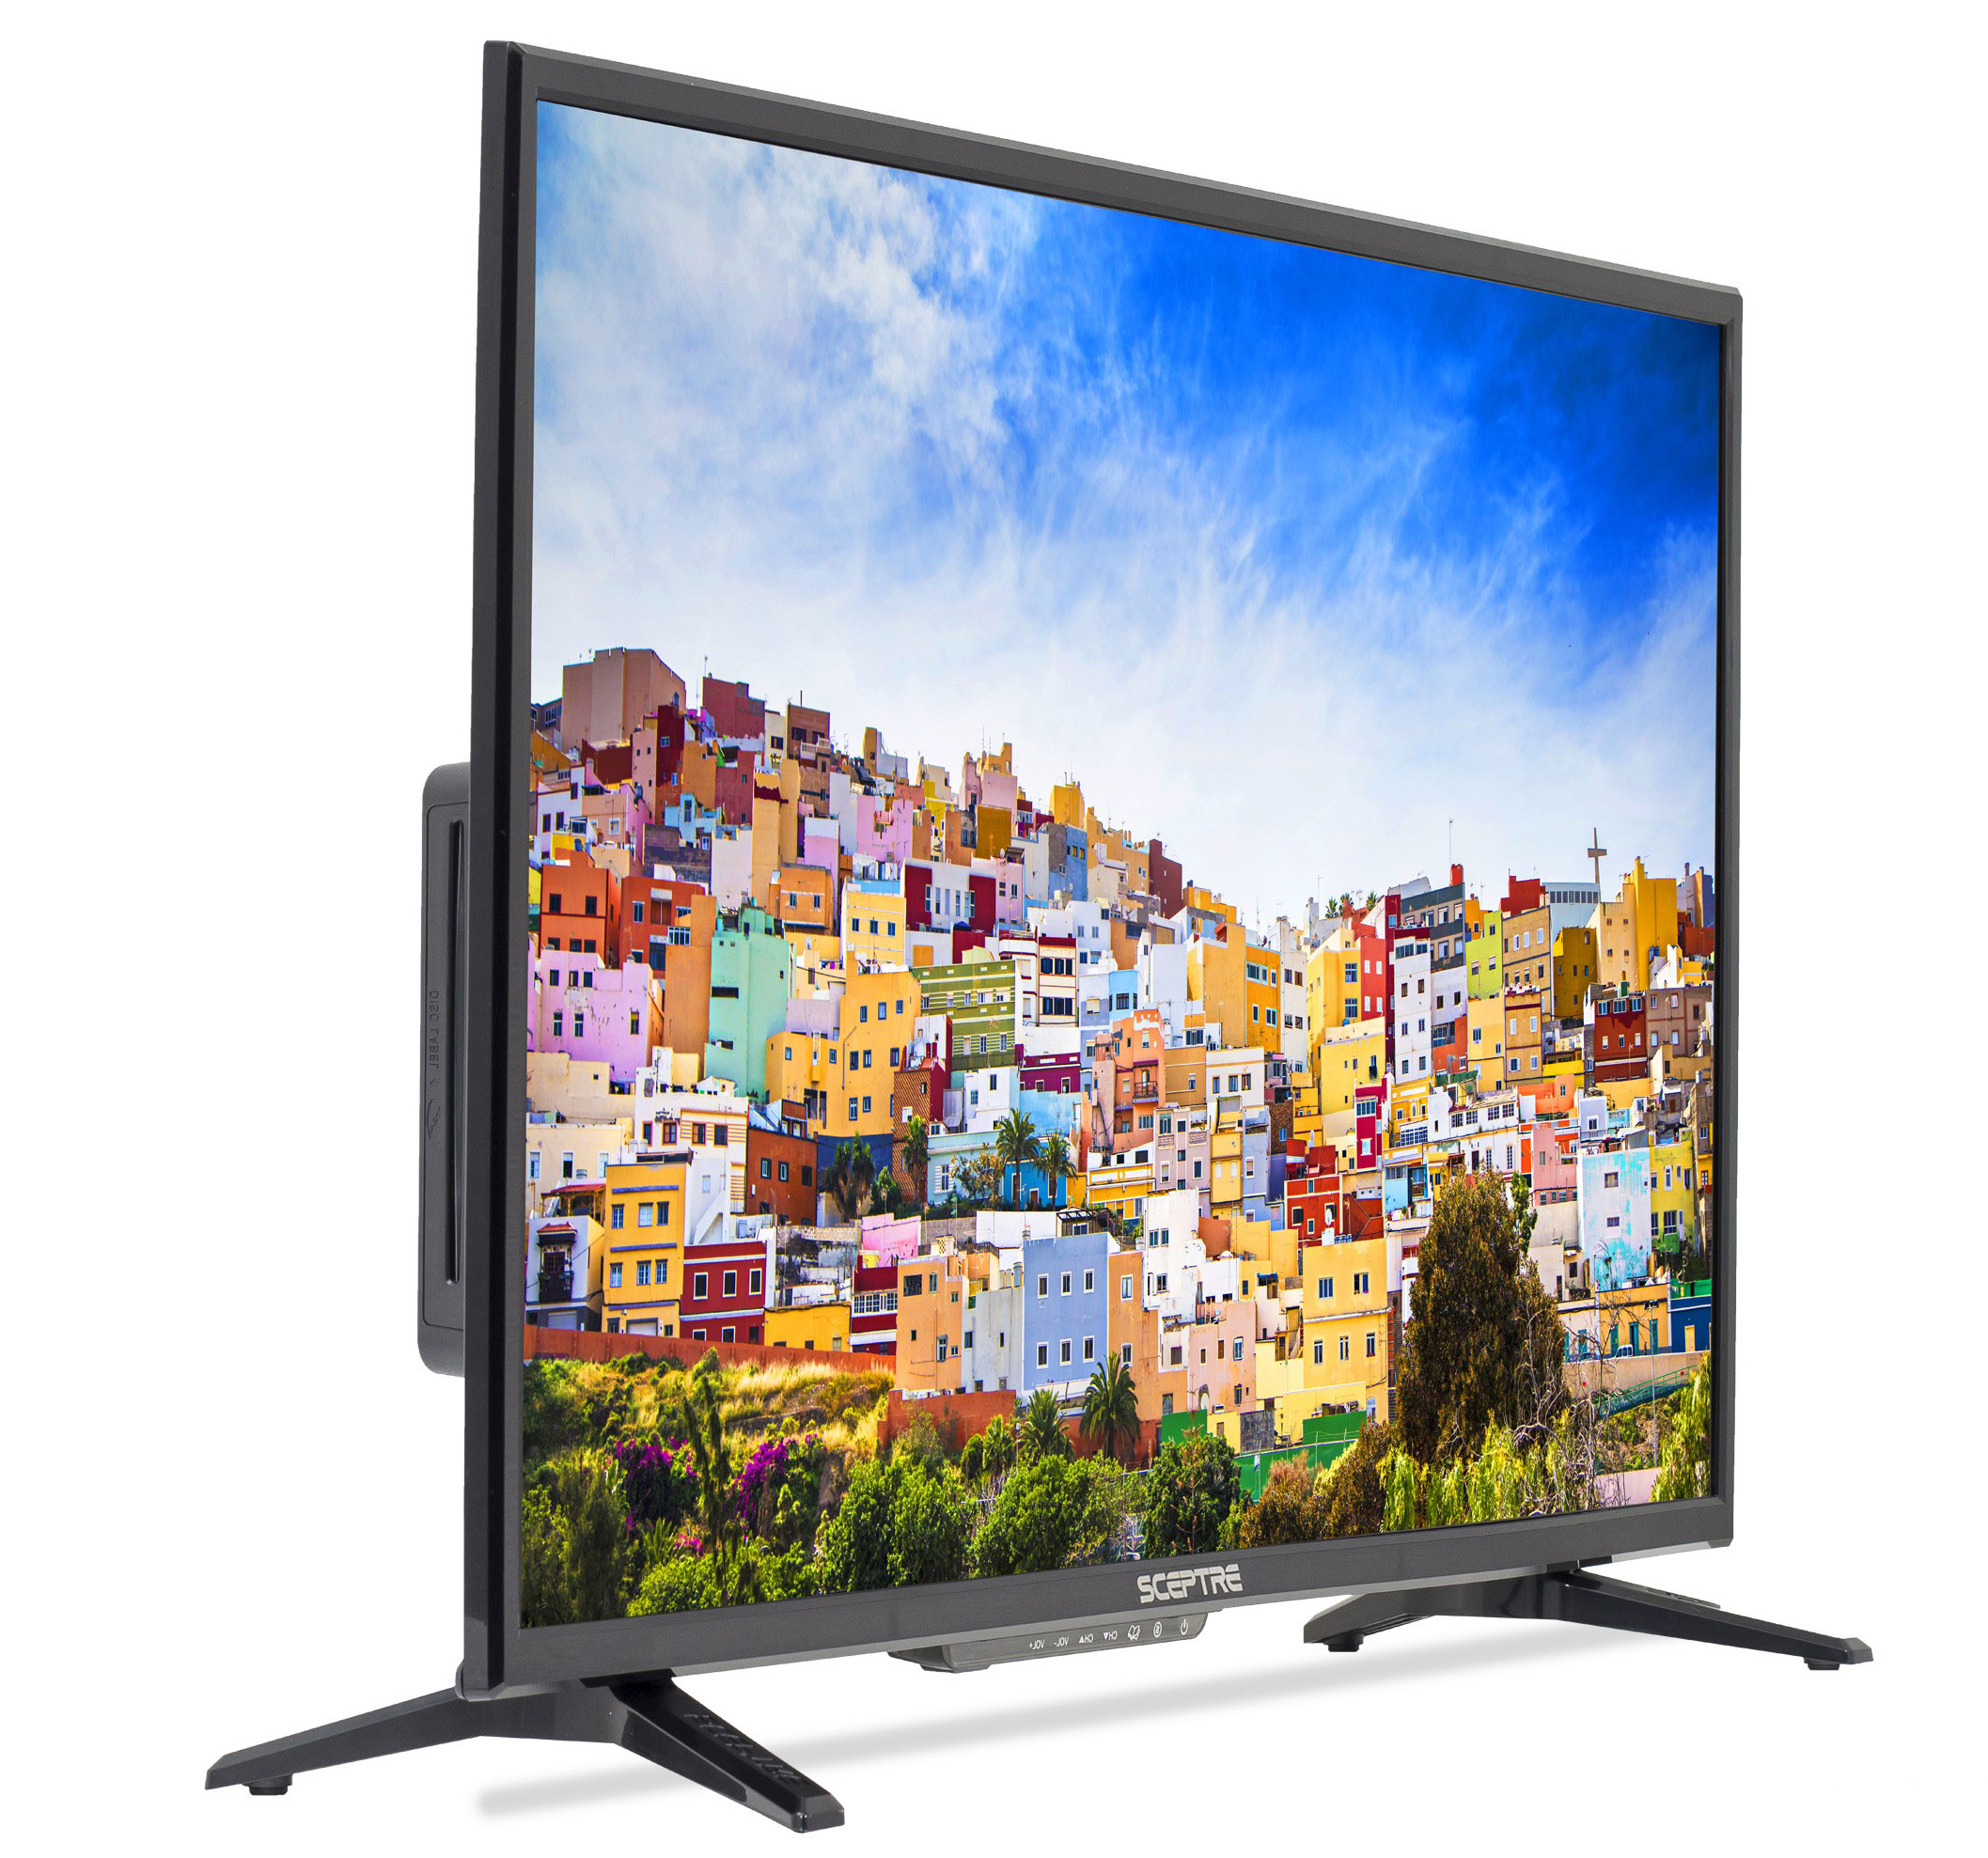 Sceptre 32" Class HD (720P) LED TV (E325BD-S) with Built-in DVD - image 3 of 7